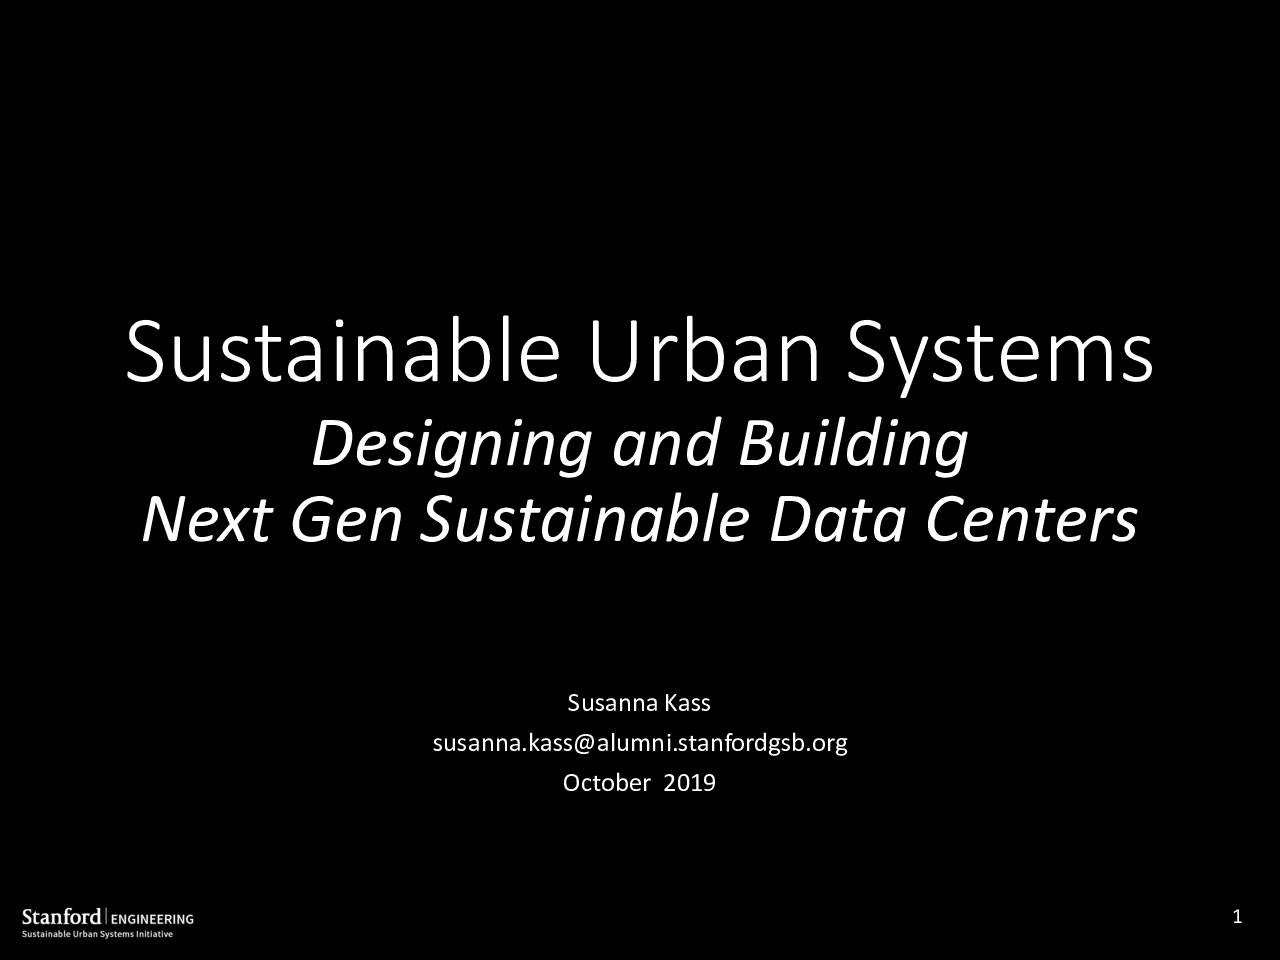 Sustainable Urban Systems Designing and Building; Next Gen Sustainable Data Centers (Presentation)